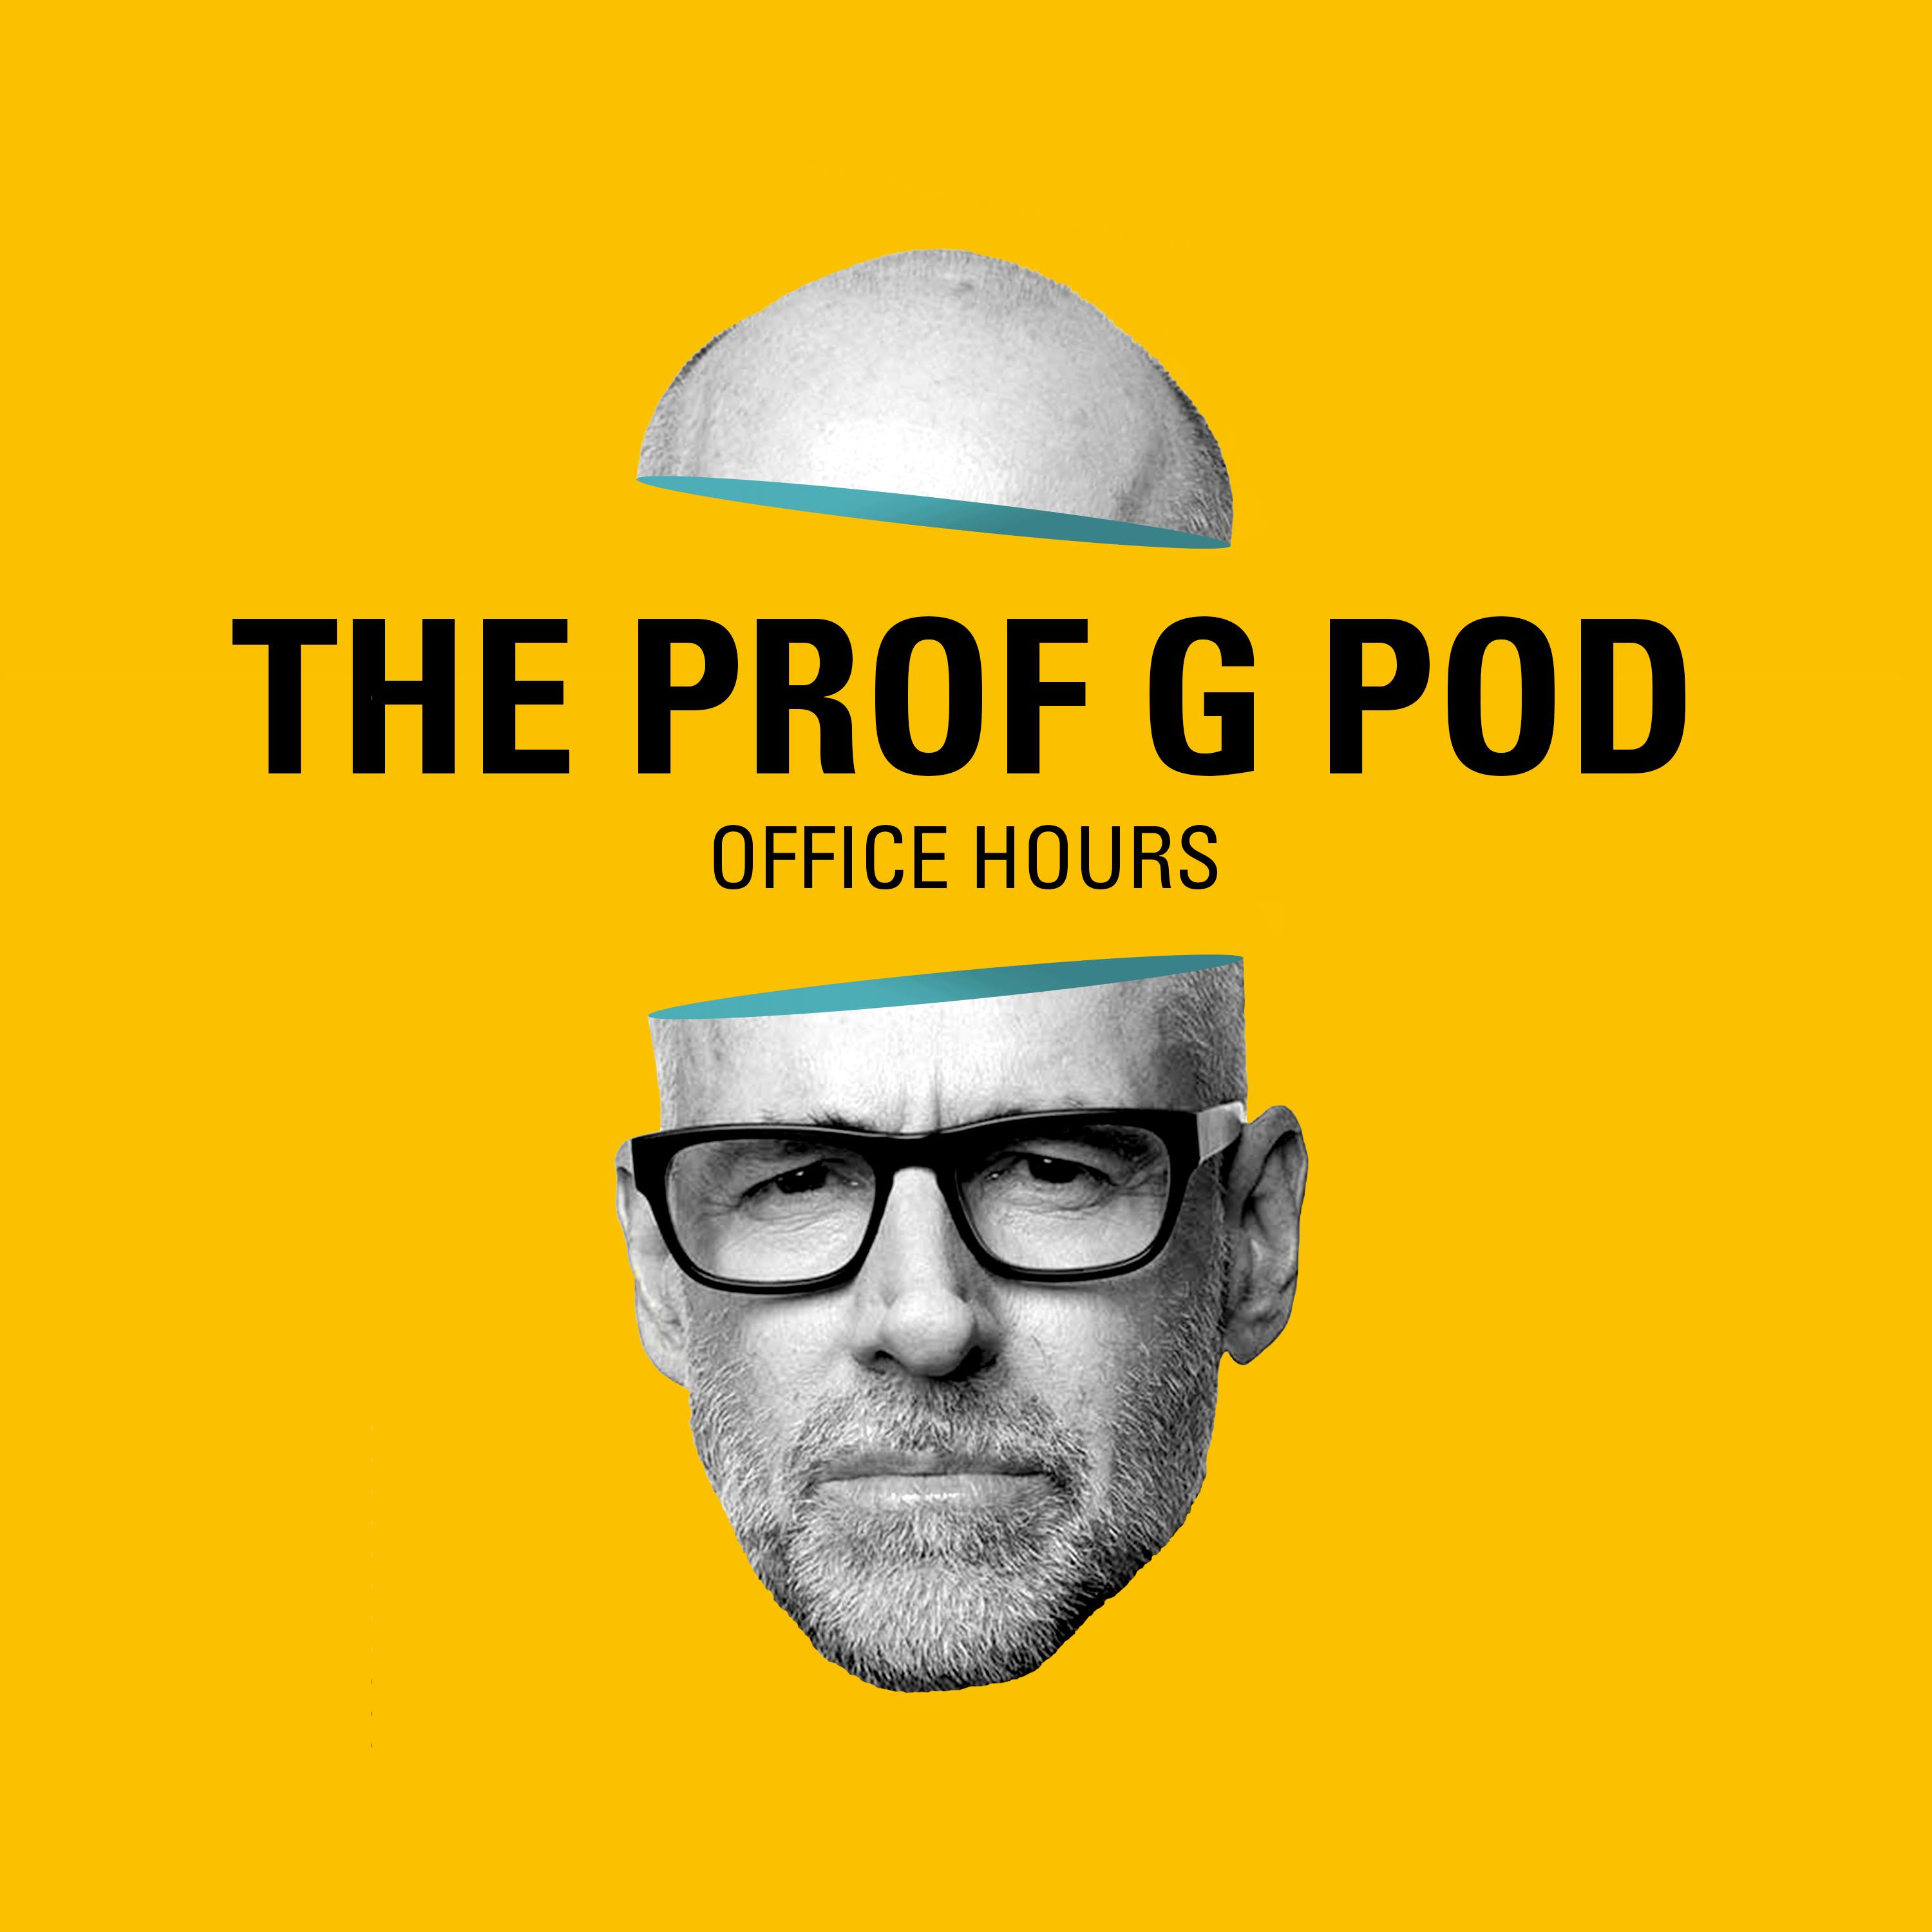 Office Hours: Tesla’s EV Charging Partnerships With GM and Ford, the Death of Reddit As We Know It? and Prioritizing Happiness When Making College Decisions